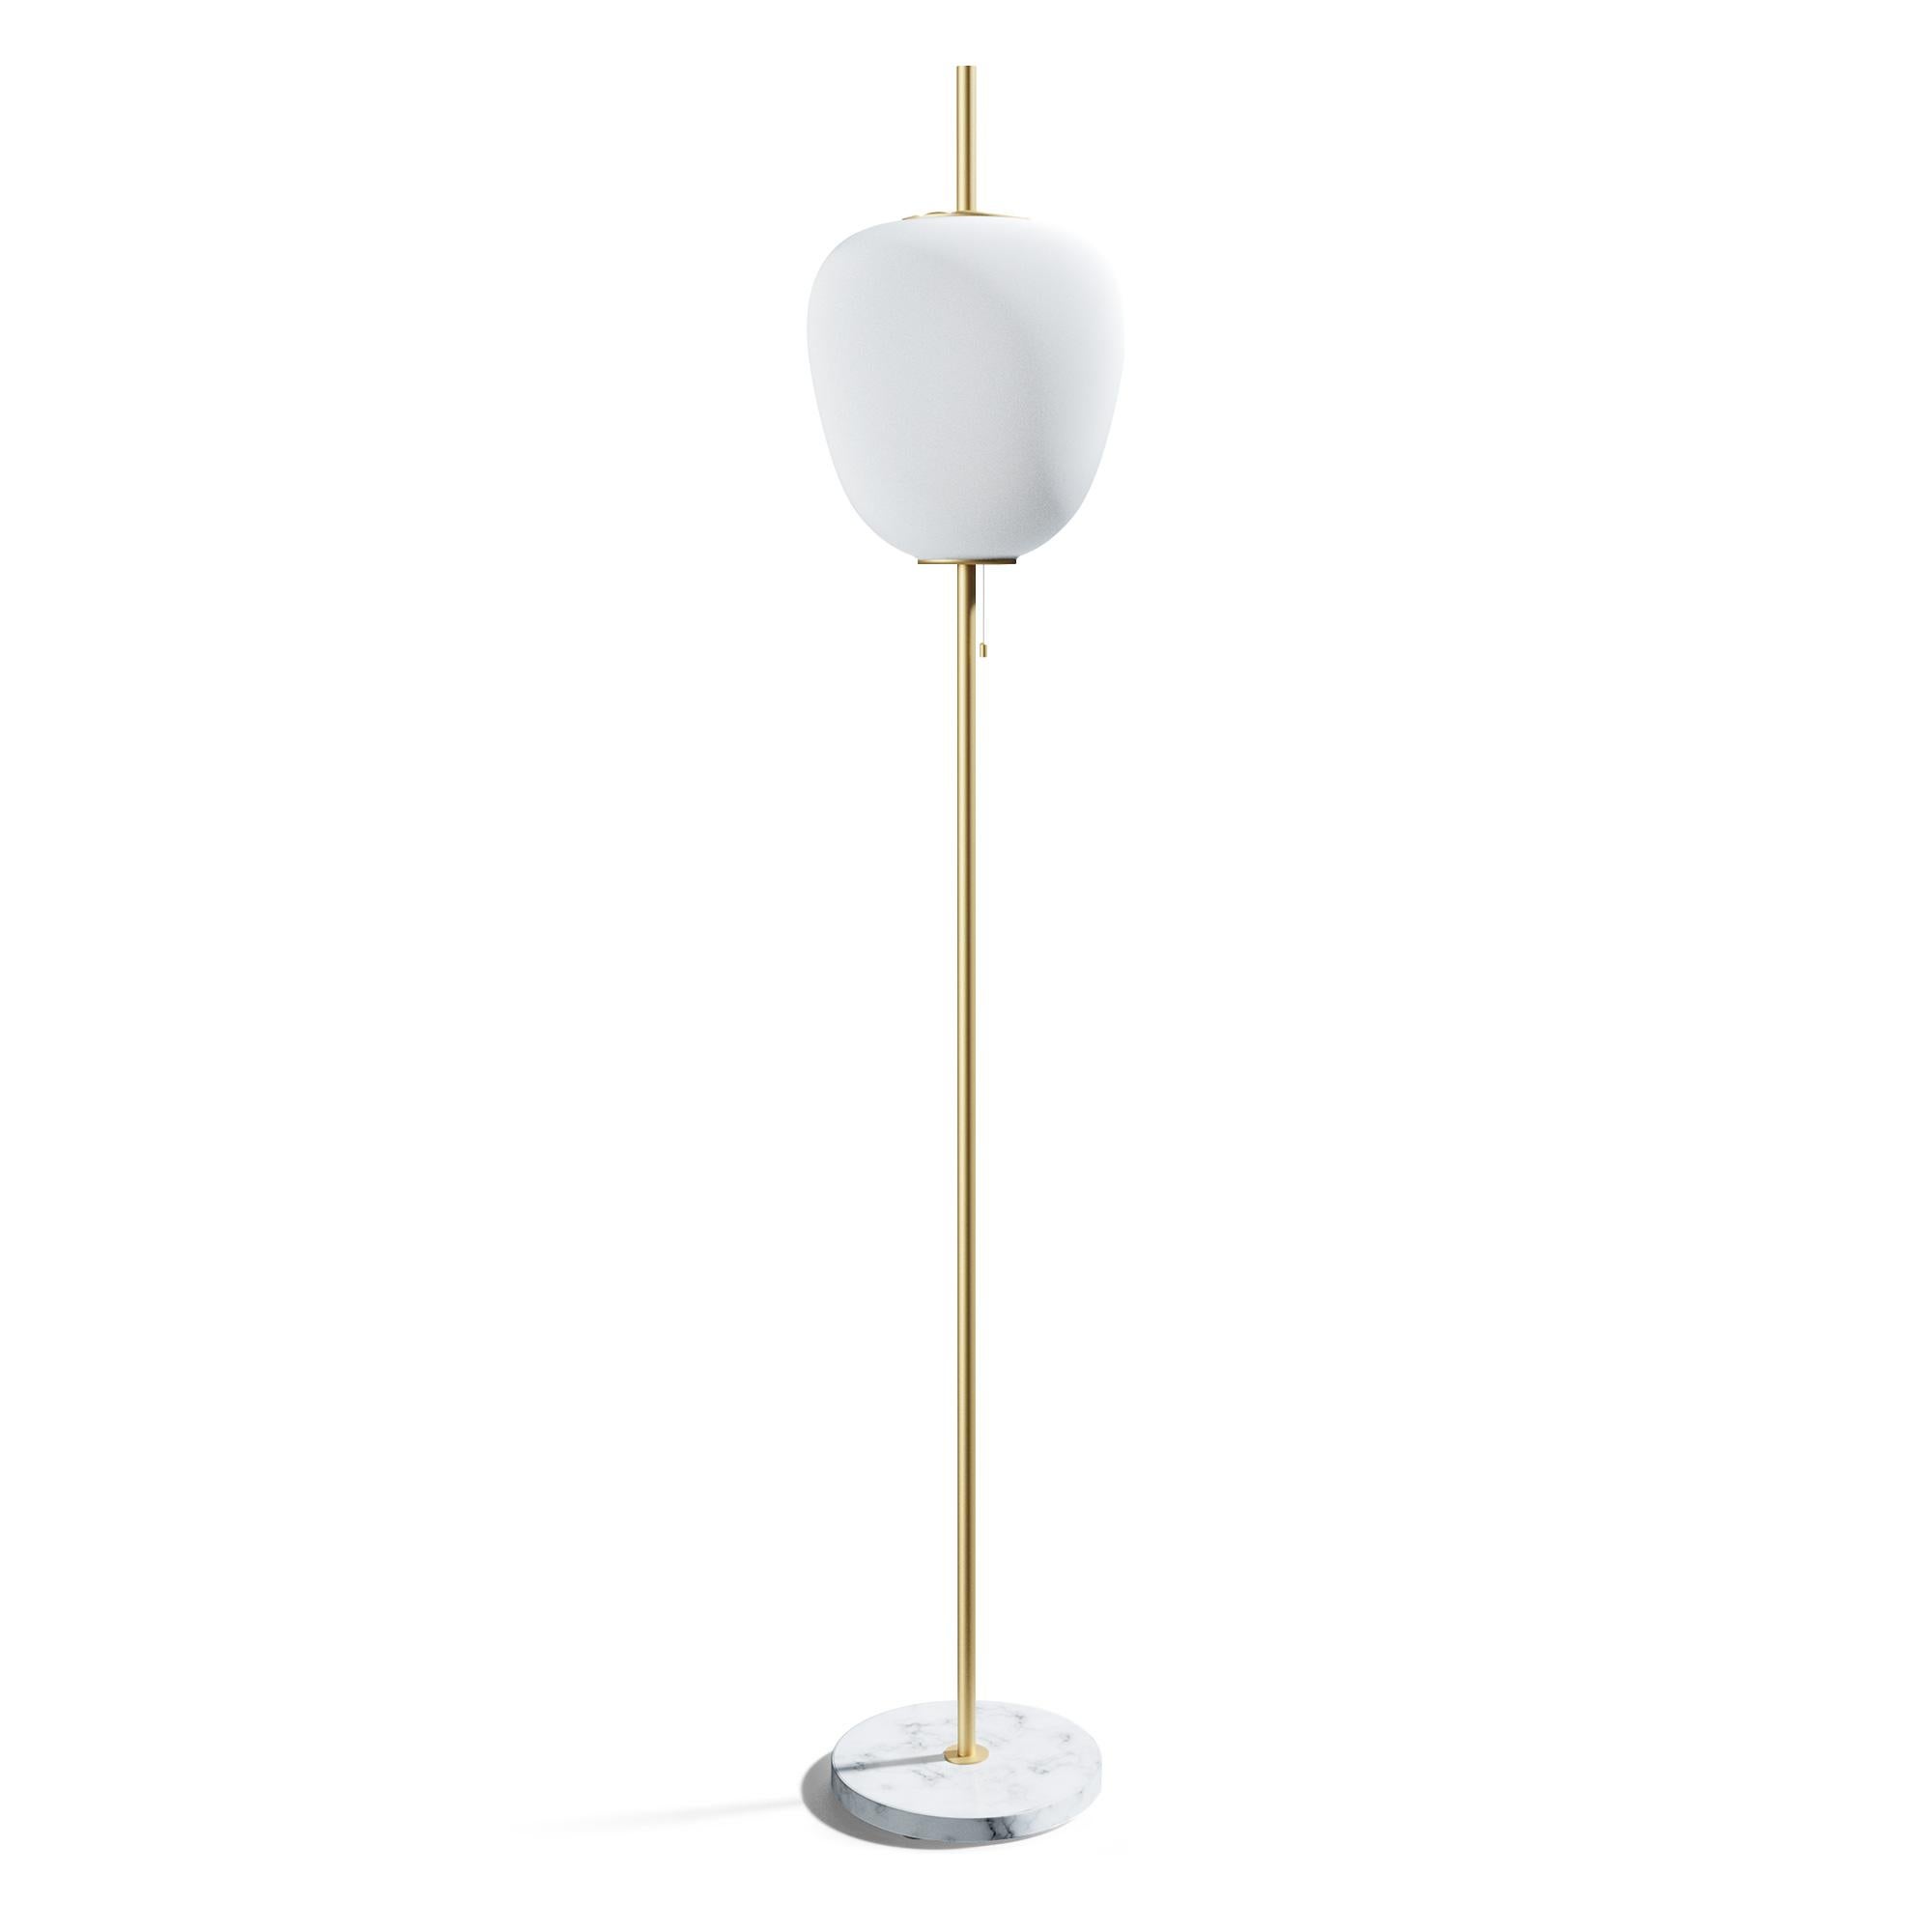 Large Joseph-André Motte J14 floor lamp in brushed brass and gray marble for Disderot. 

Originally designed in 1957, this sculptural floor lamp is a newly produced numbered edition with authentication certificate made in France by Disderot with